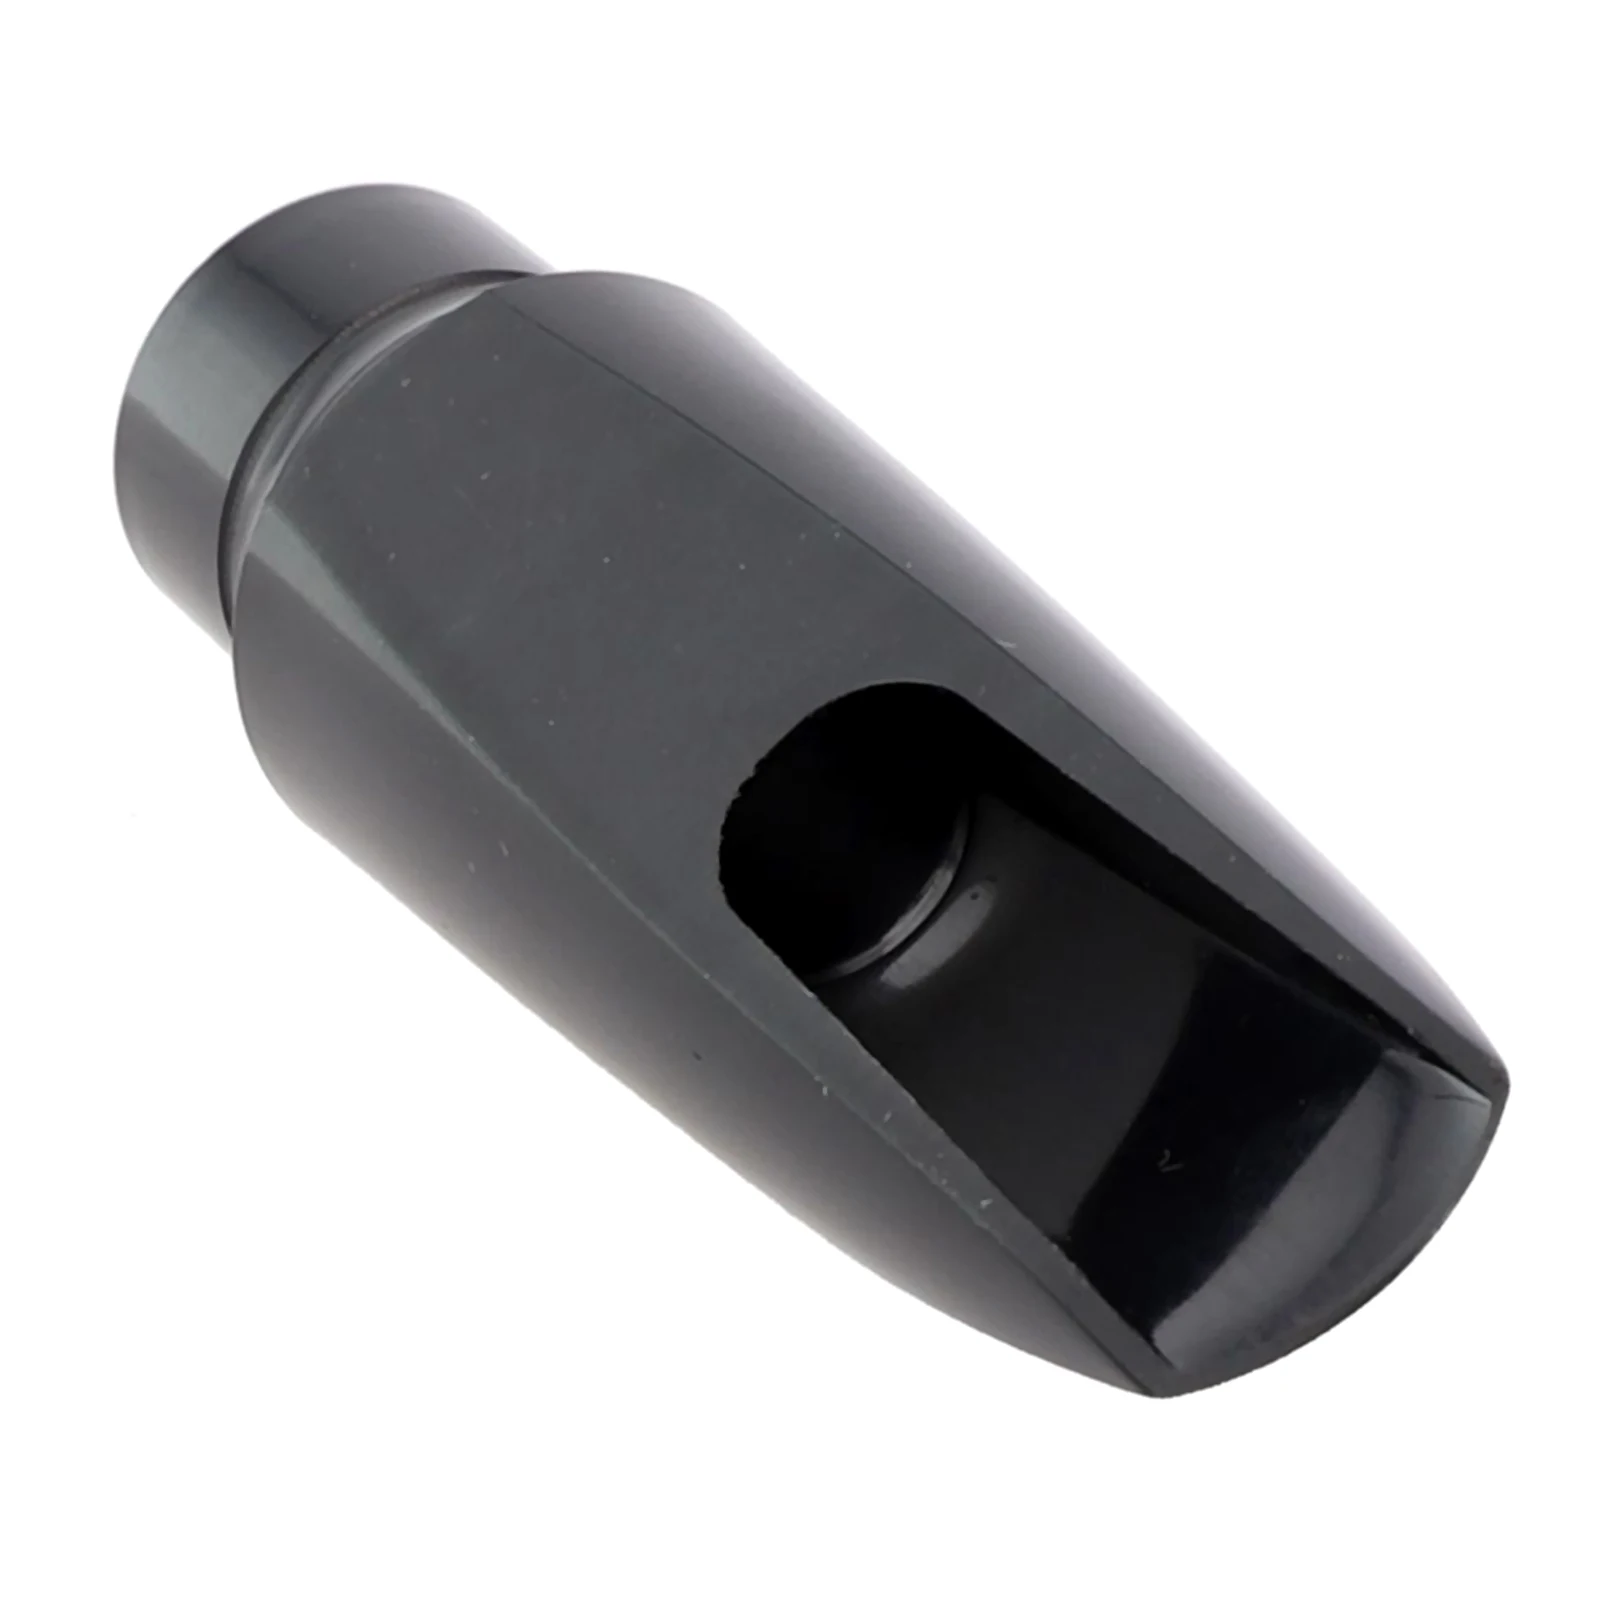 High Quality Practical Useful Brand New Saxophone Mouthpiece Sax Beginners Black For Professionals No Chips Parts